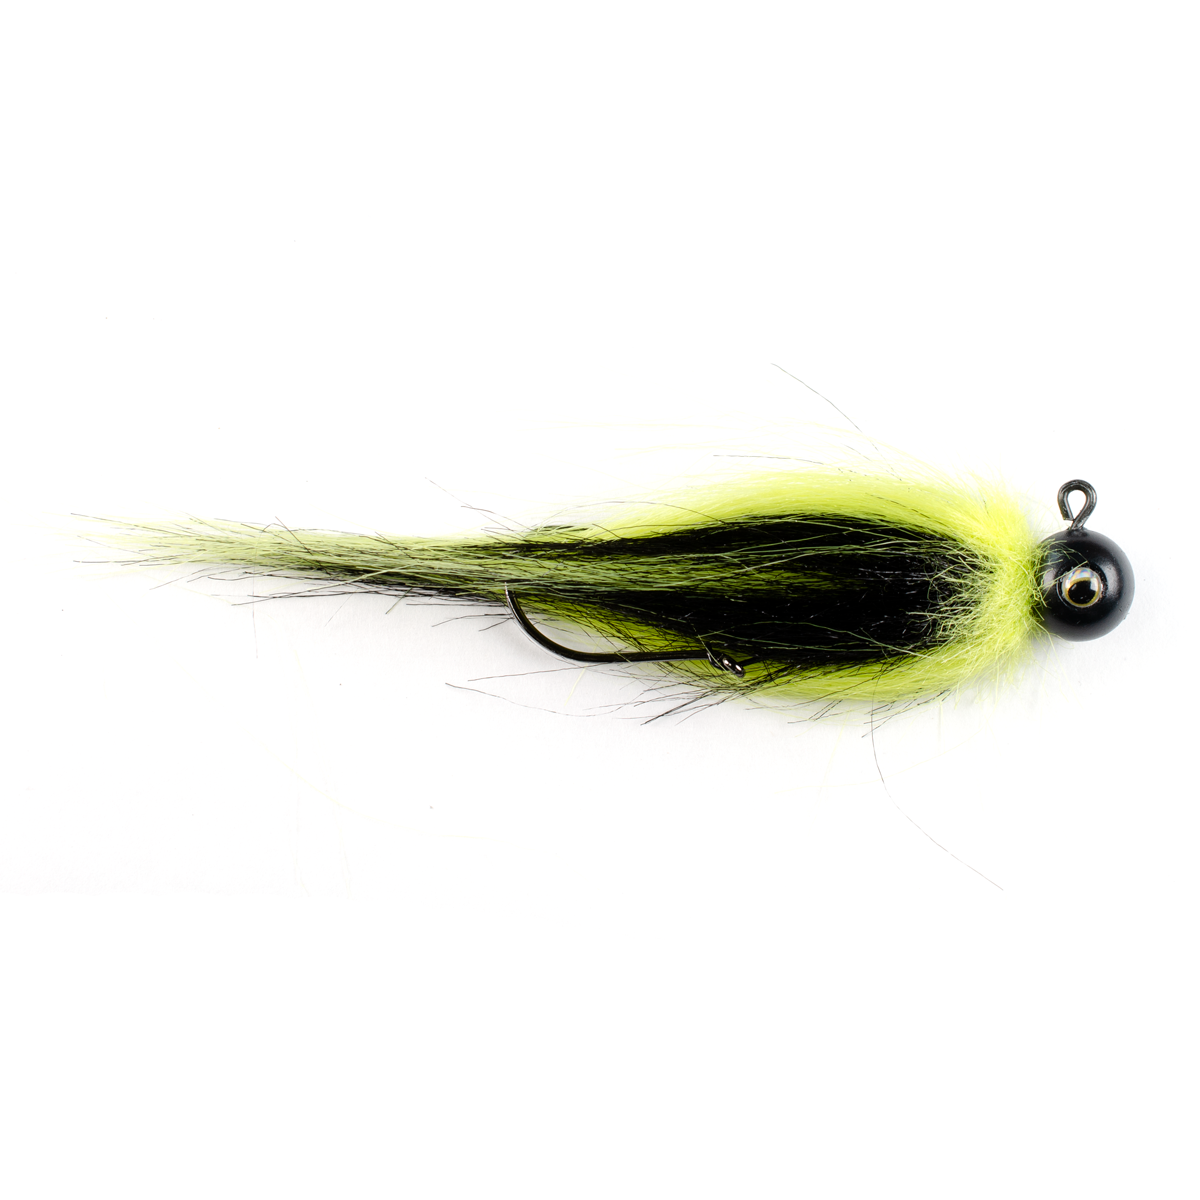 Black quarter ounce jig head with black and chartreuse Fair Flies fly fur for skirting material